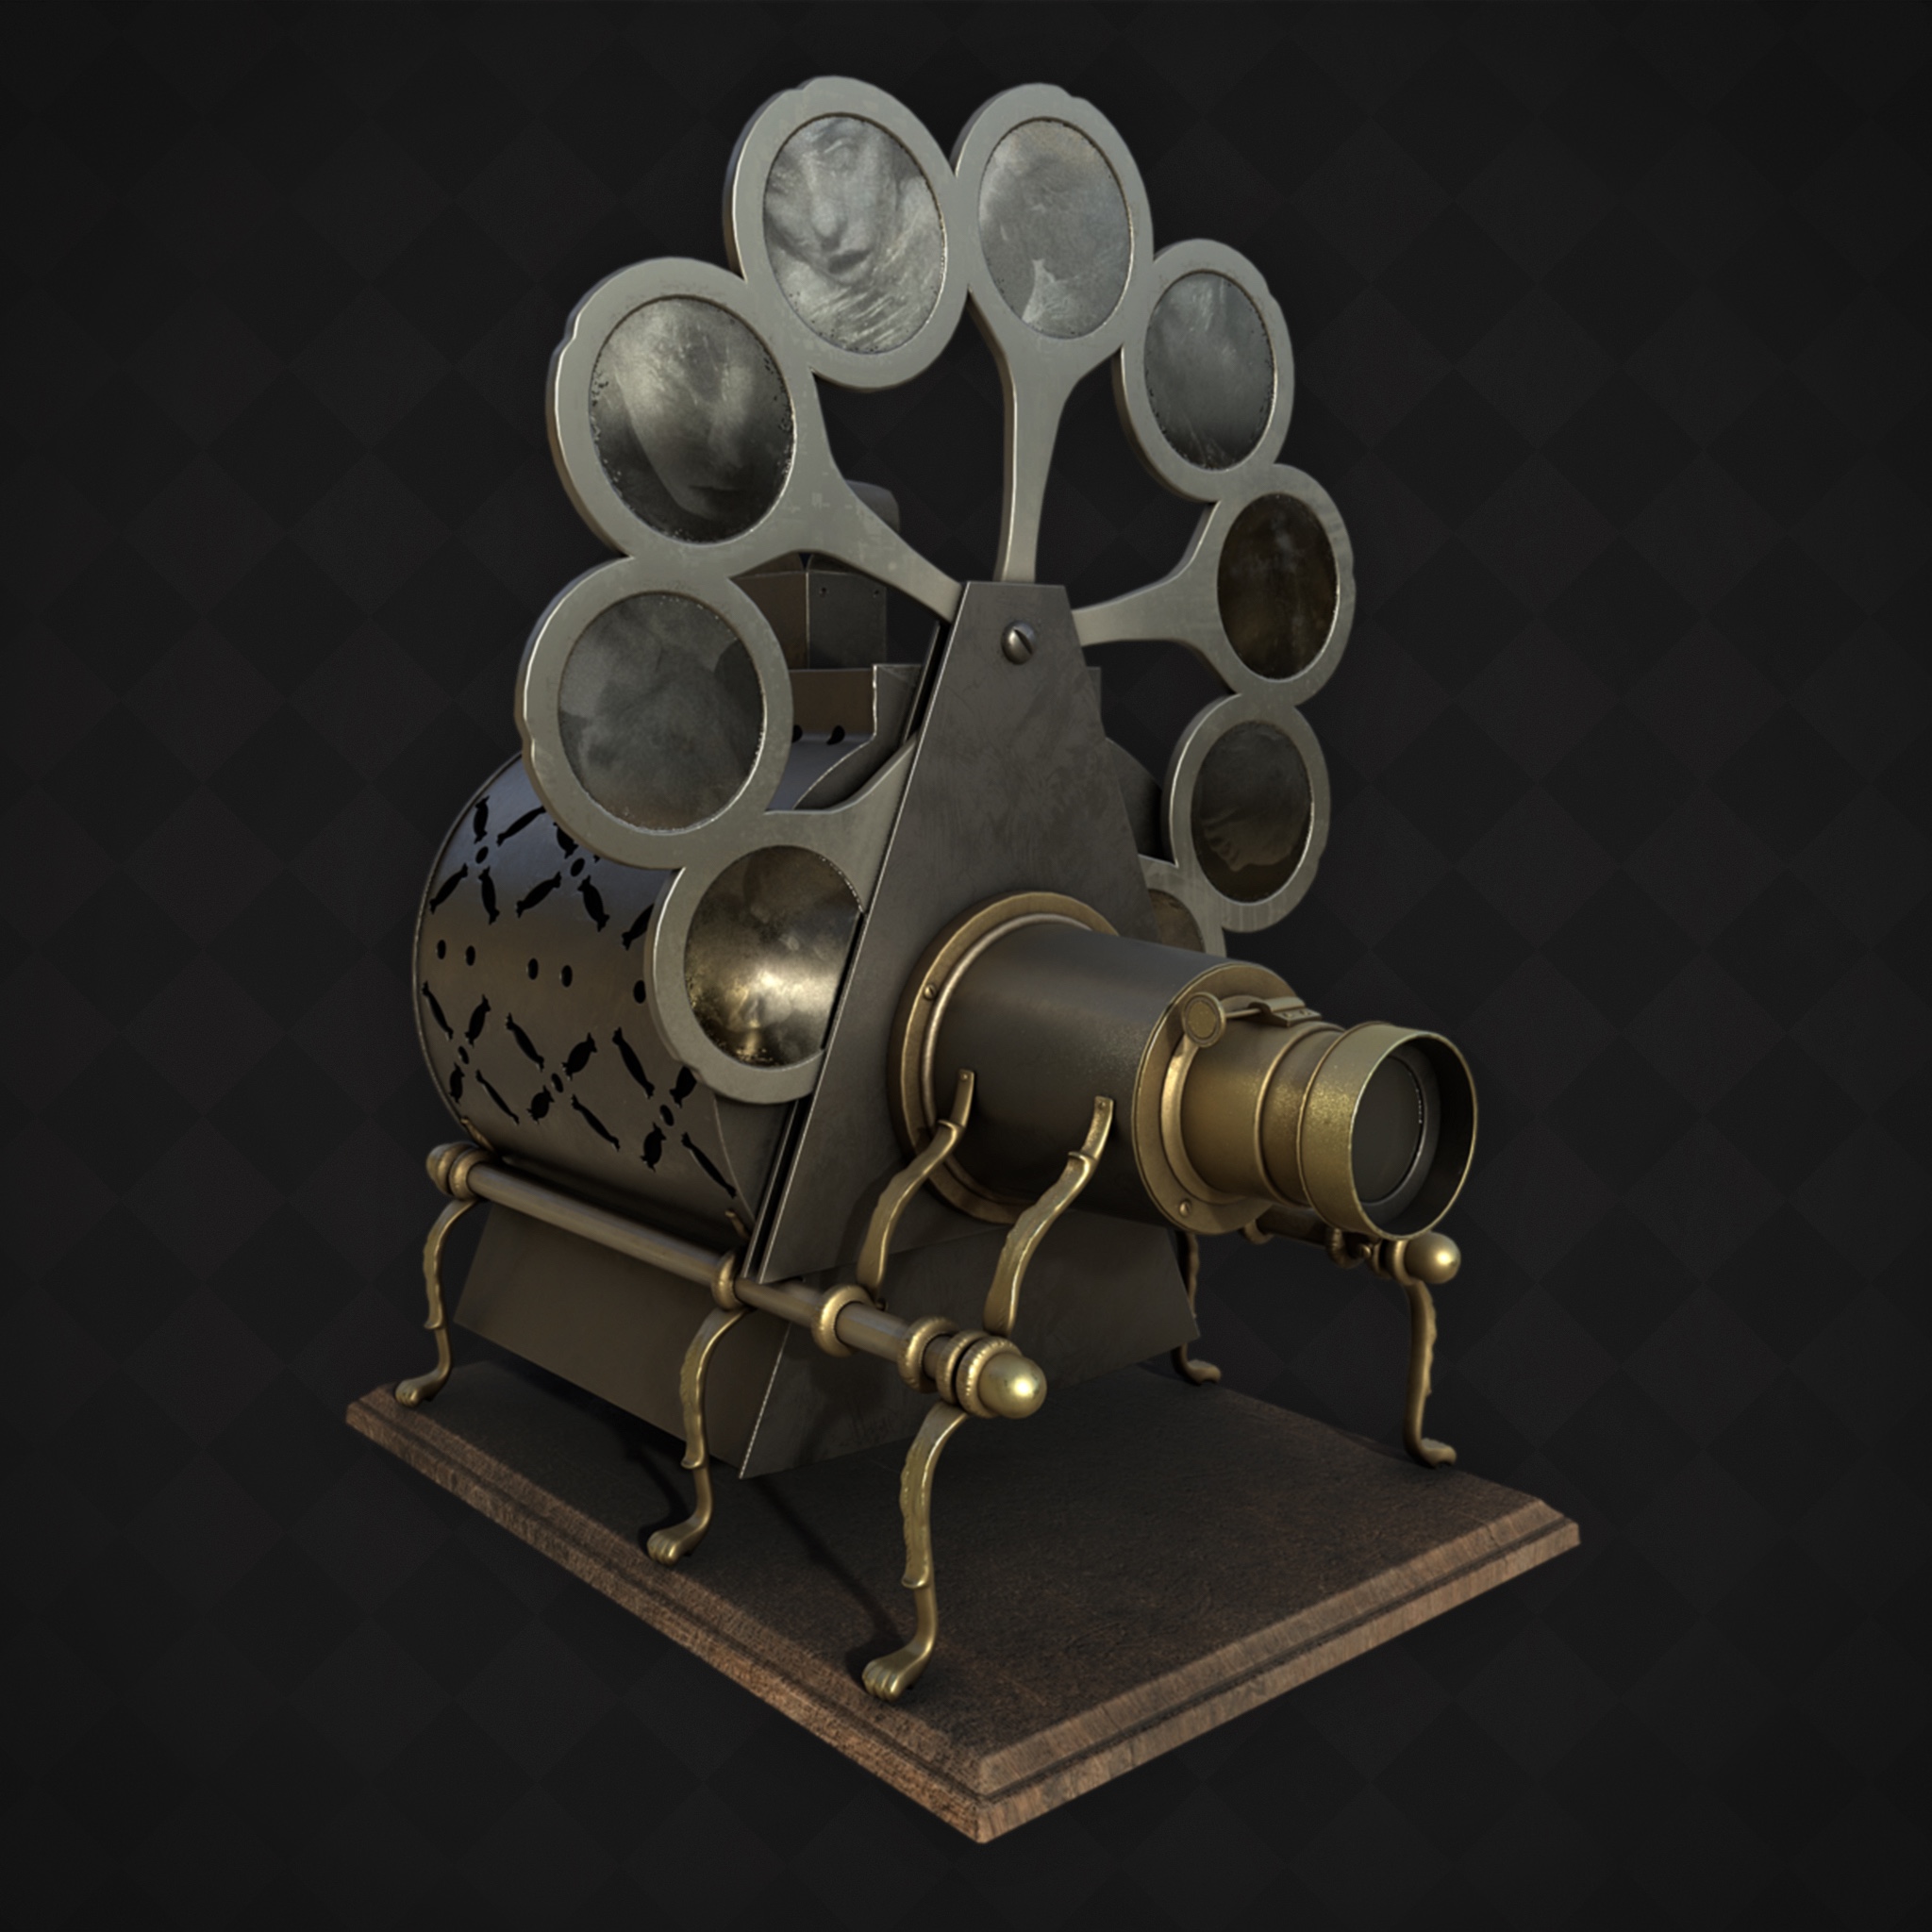 BA(Hons) Game Art and Design work by Jessica Wilson depicting a 3D model of an 1890's magic lantern projector.